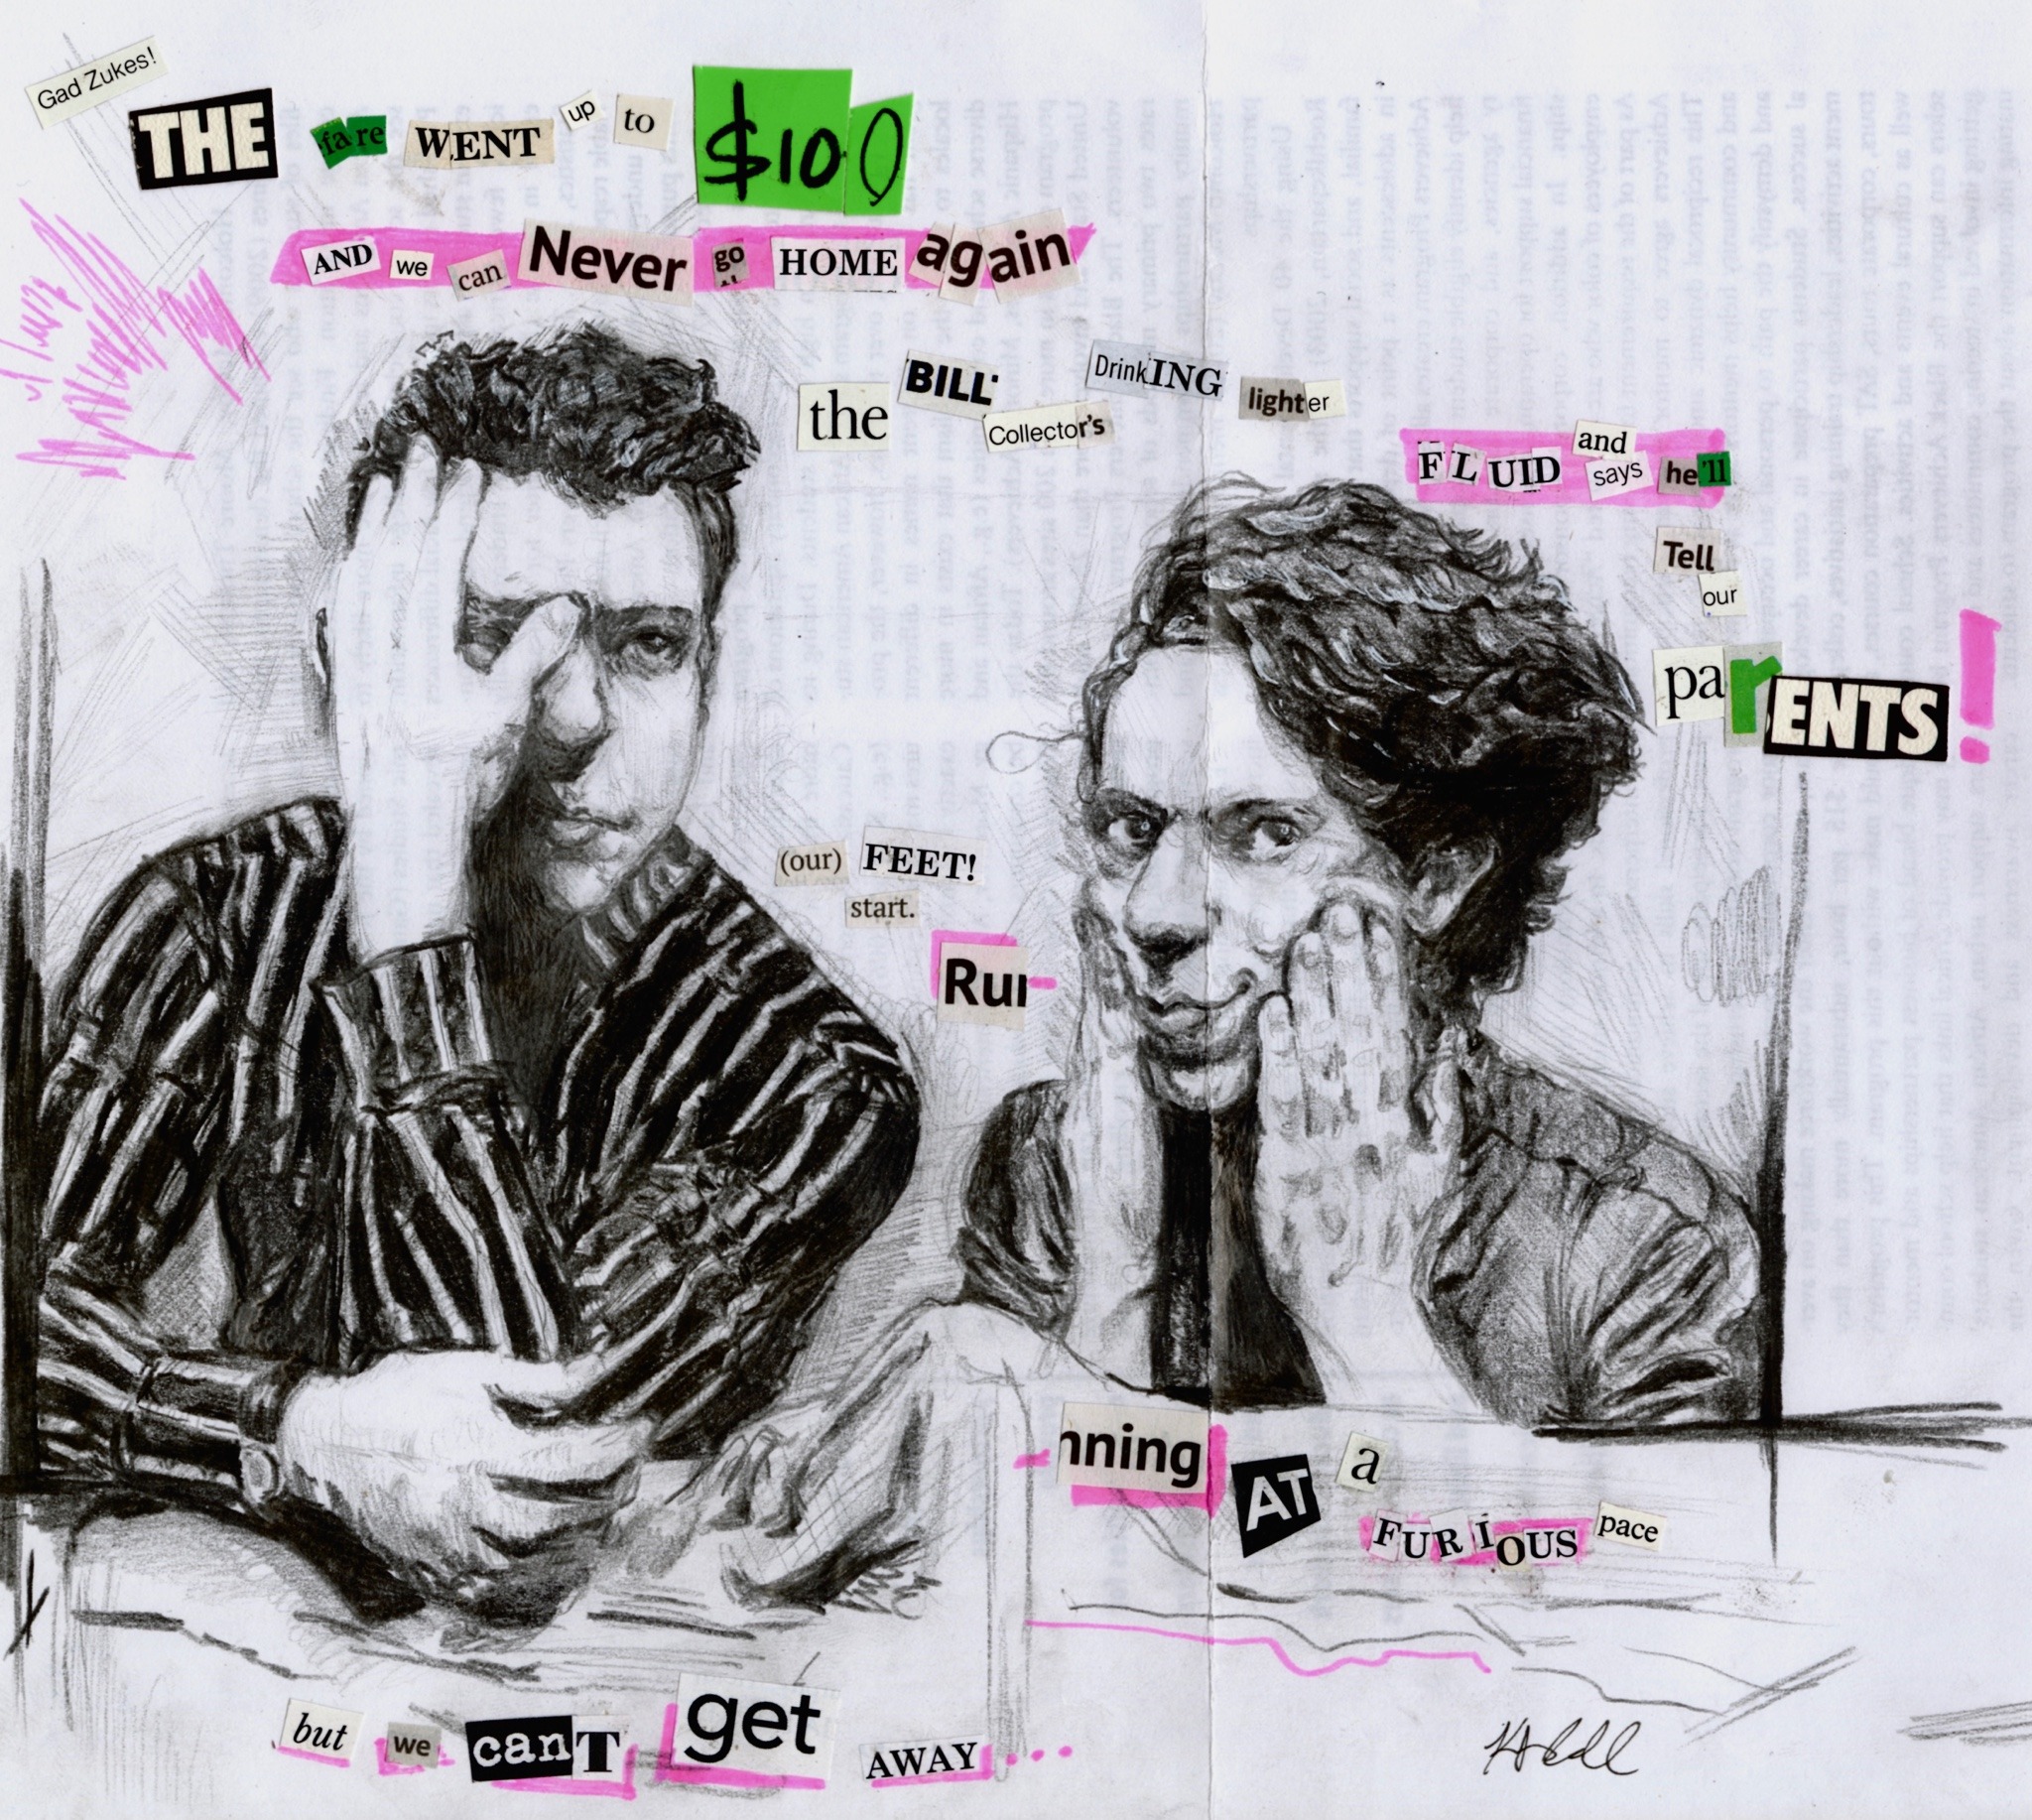 pencil sketch of John Linnell and John Flansburgh from the band They Might be Giants. Lindell is on your right and Flans is on your left. They are surrounded by a ransom note styled collage, which reads, ‘Gad Zukes! The fare went up to $100 and we can never go home again/ the bill collectors drinking lighter fluid and says he’ll tell your parents!/ our feet start running at a furious pace/ but we can’t get away…’ The text is from the song ‘Token Back to Brooklyn’ by They Might be Giants.